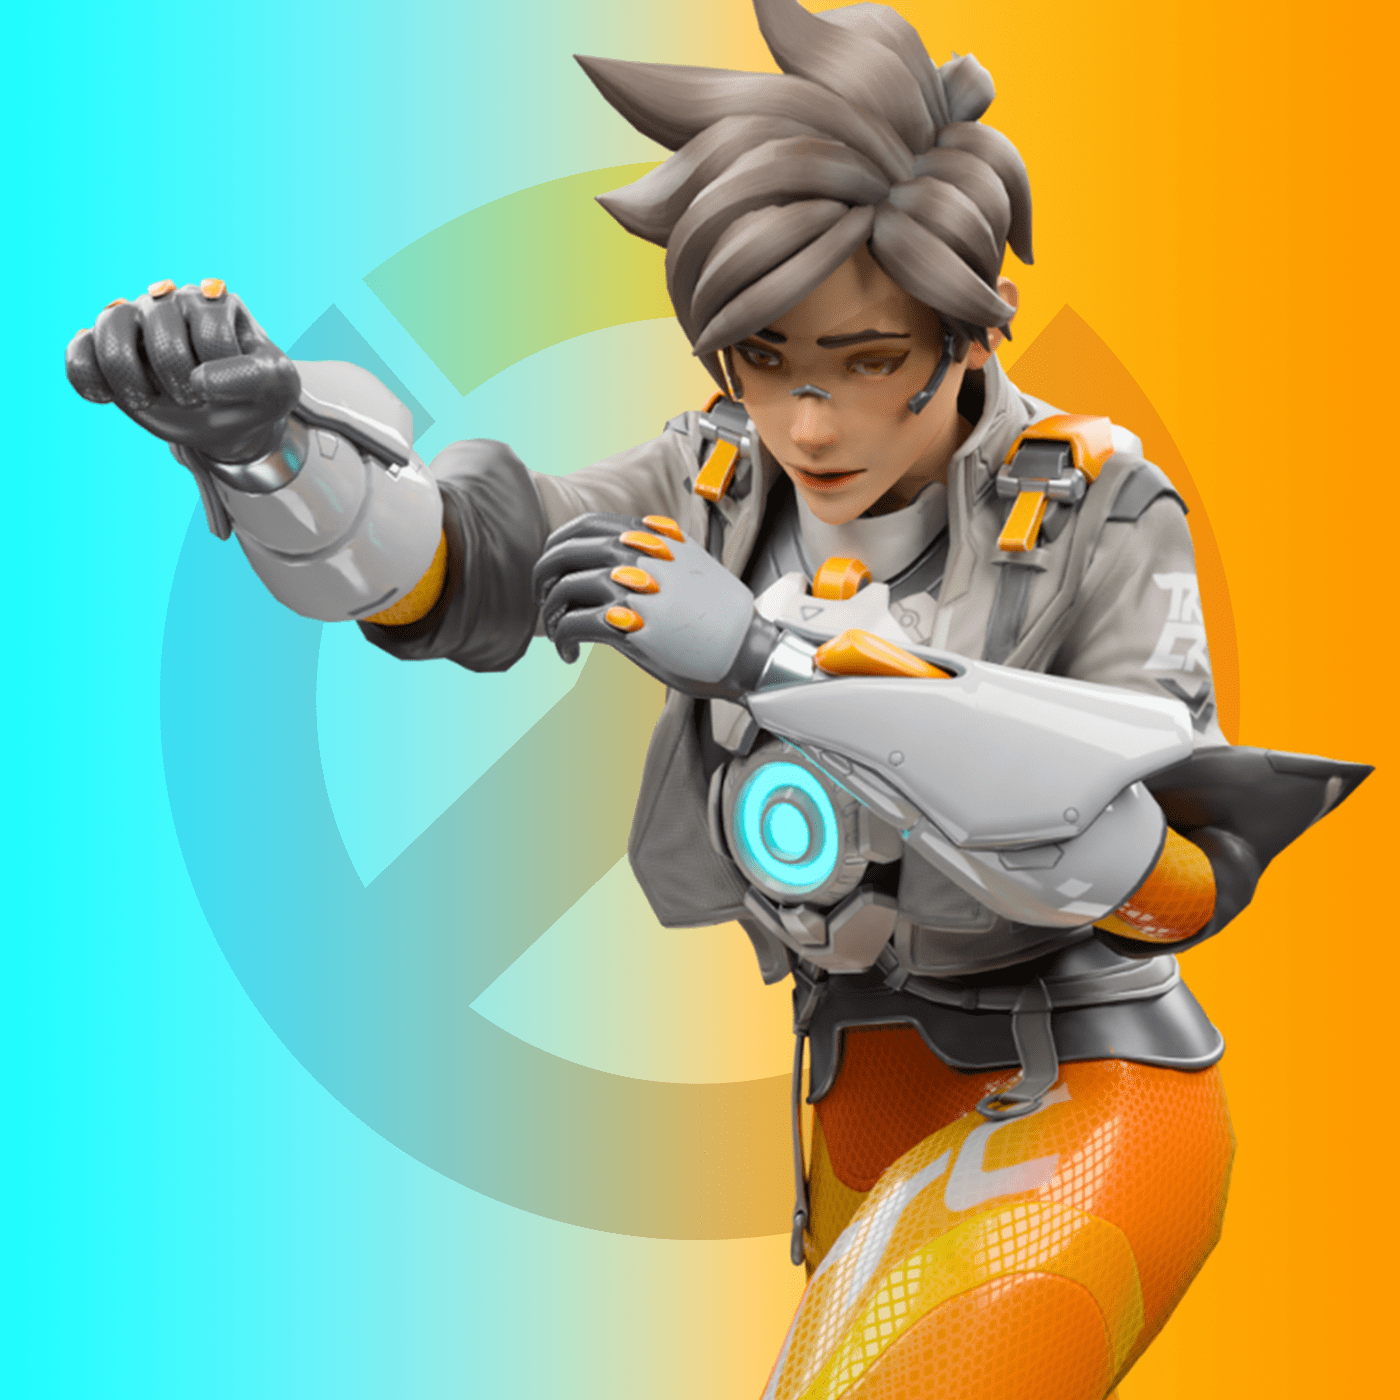 3D game 3D Character 3D model 3d modeling 3d render Tracer overwatch 2 game character 3D Rendering